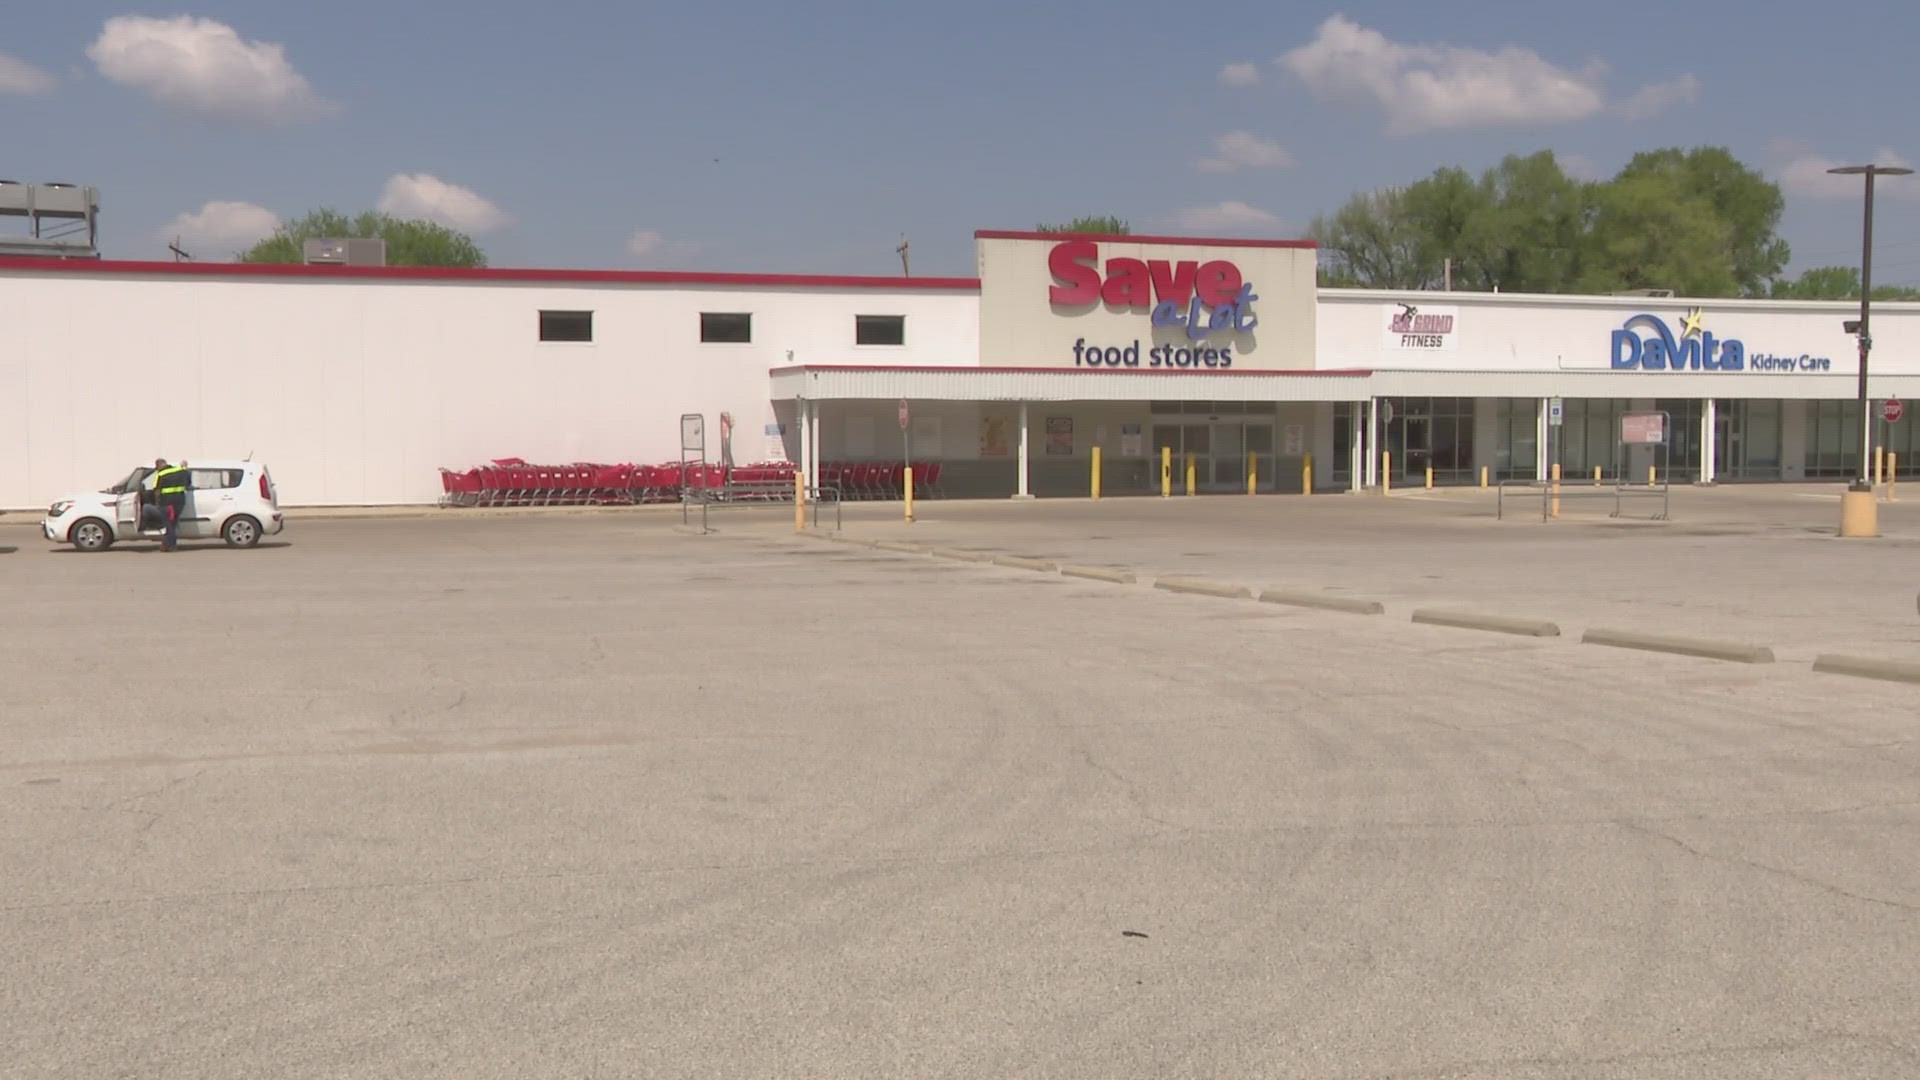 The Save A Lot is the second closure in weeks in the Metro East. A Walmart in Cahokia Heights closed in early April.